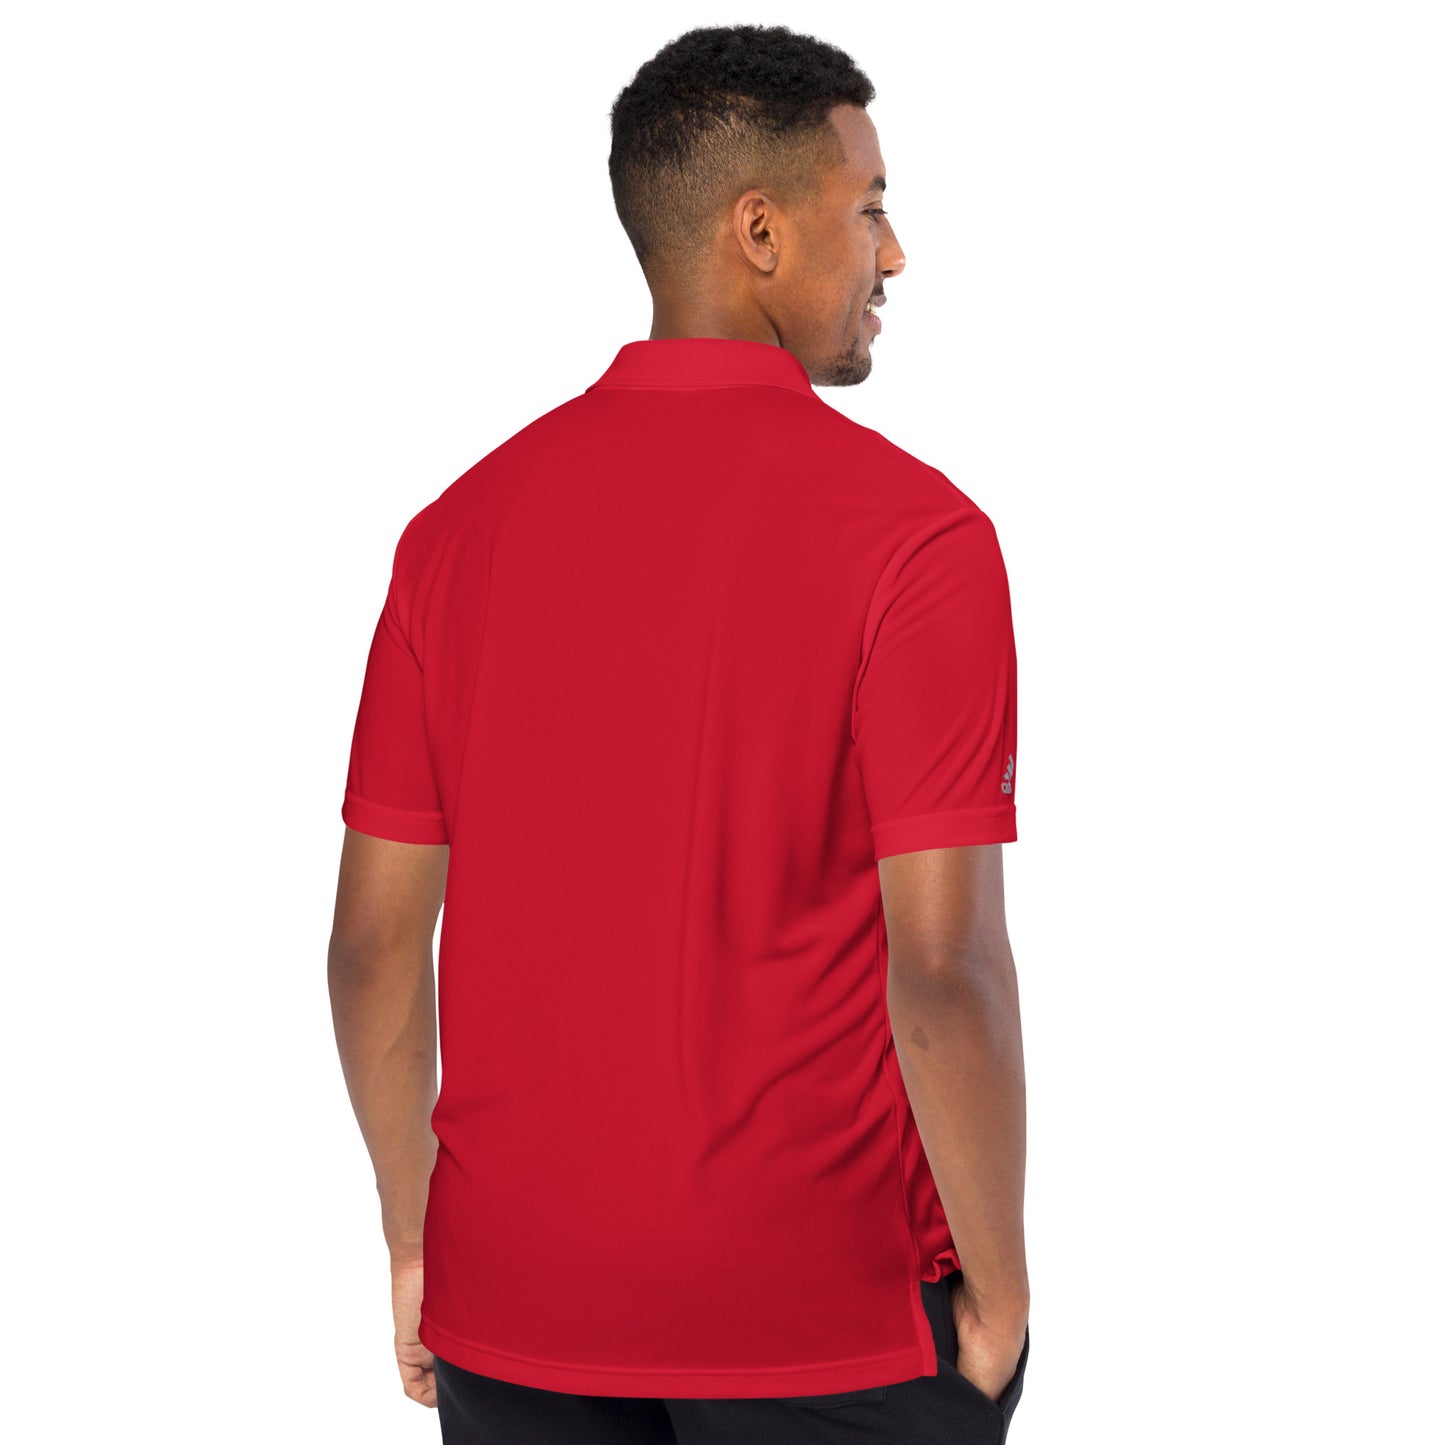 A Adidas Shirt Unleash Your Inner Athlete with Adidas A230 Performance Sport Shirt in Desert Theme - Perfect for Sports Enthusiasts!